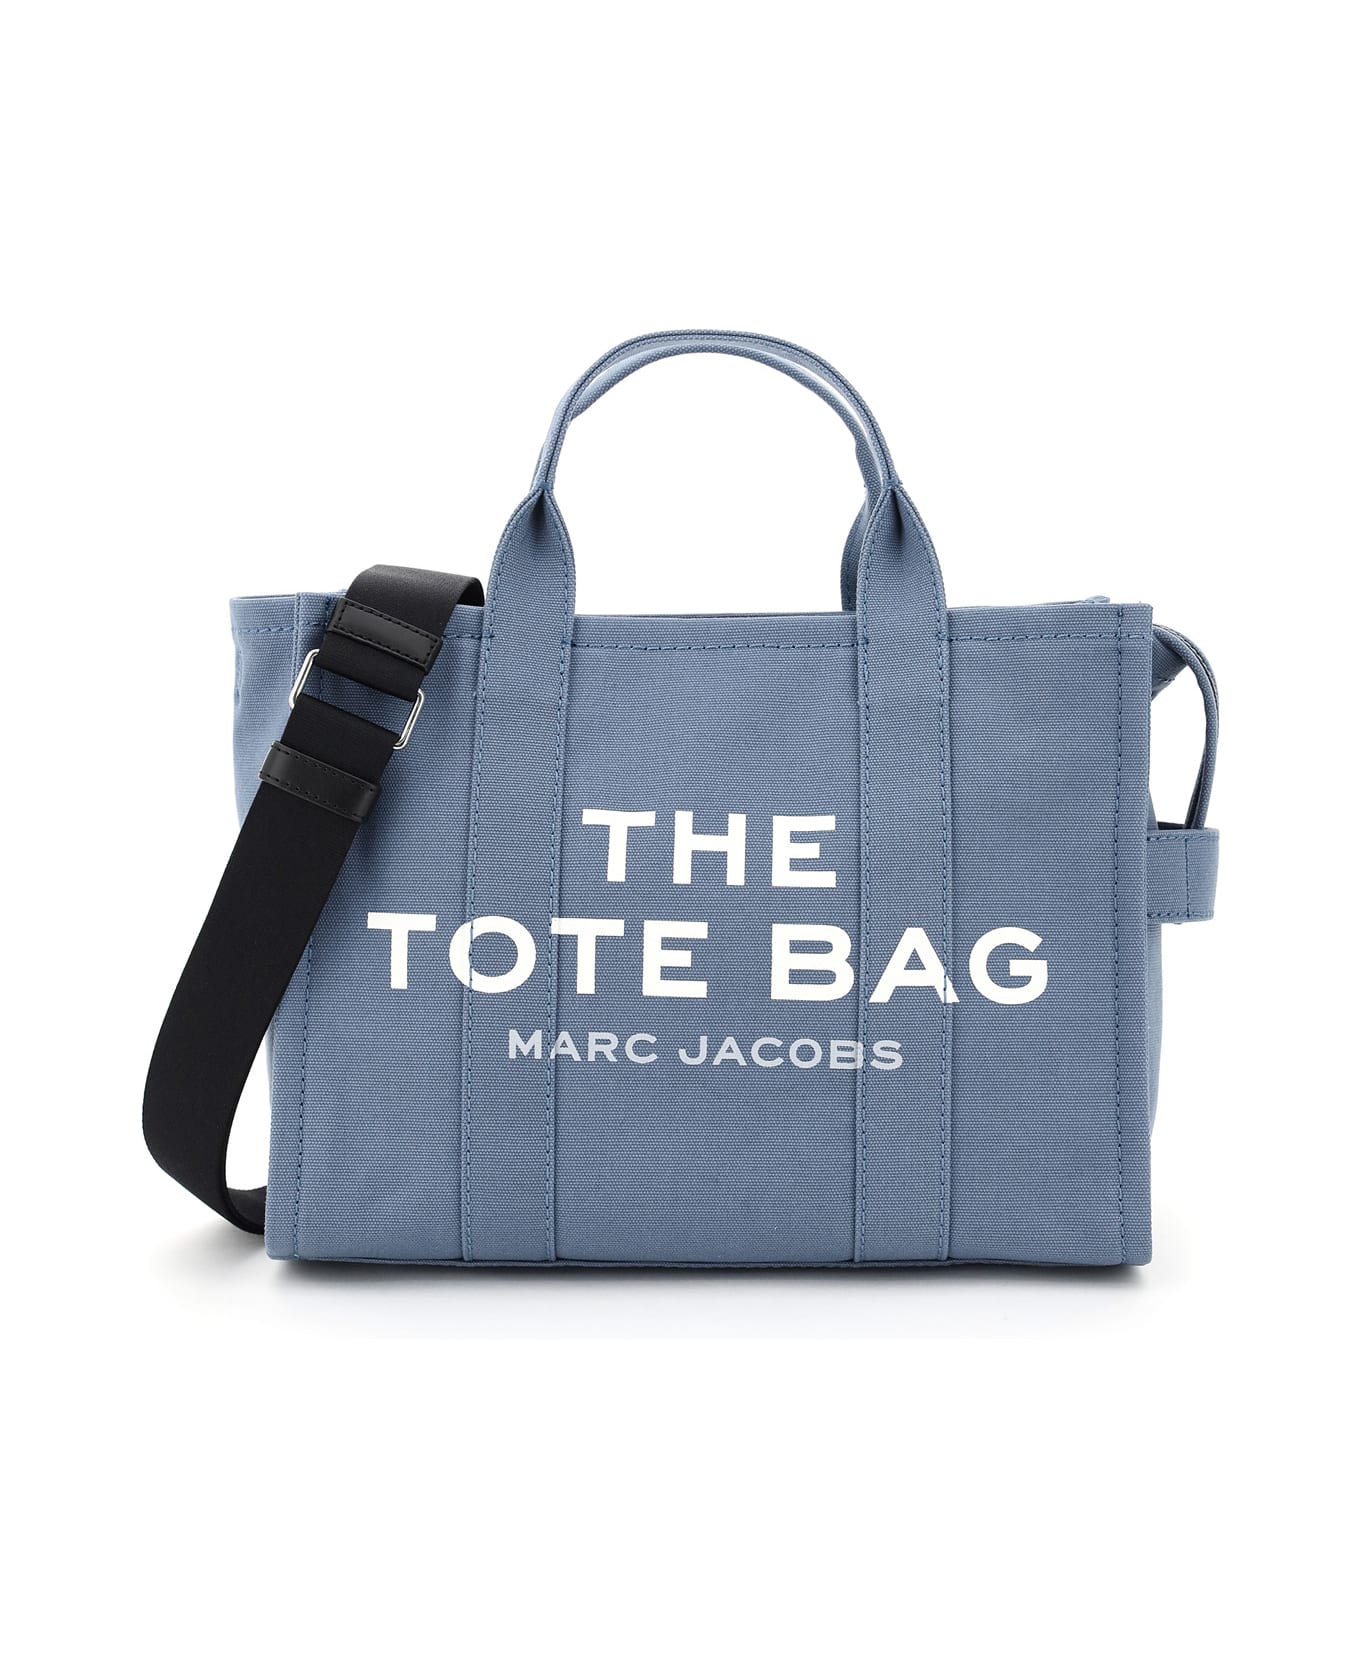 Marc Jacobs The Tote Bag Medium - Blue Shadow トートバッグ